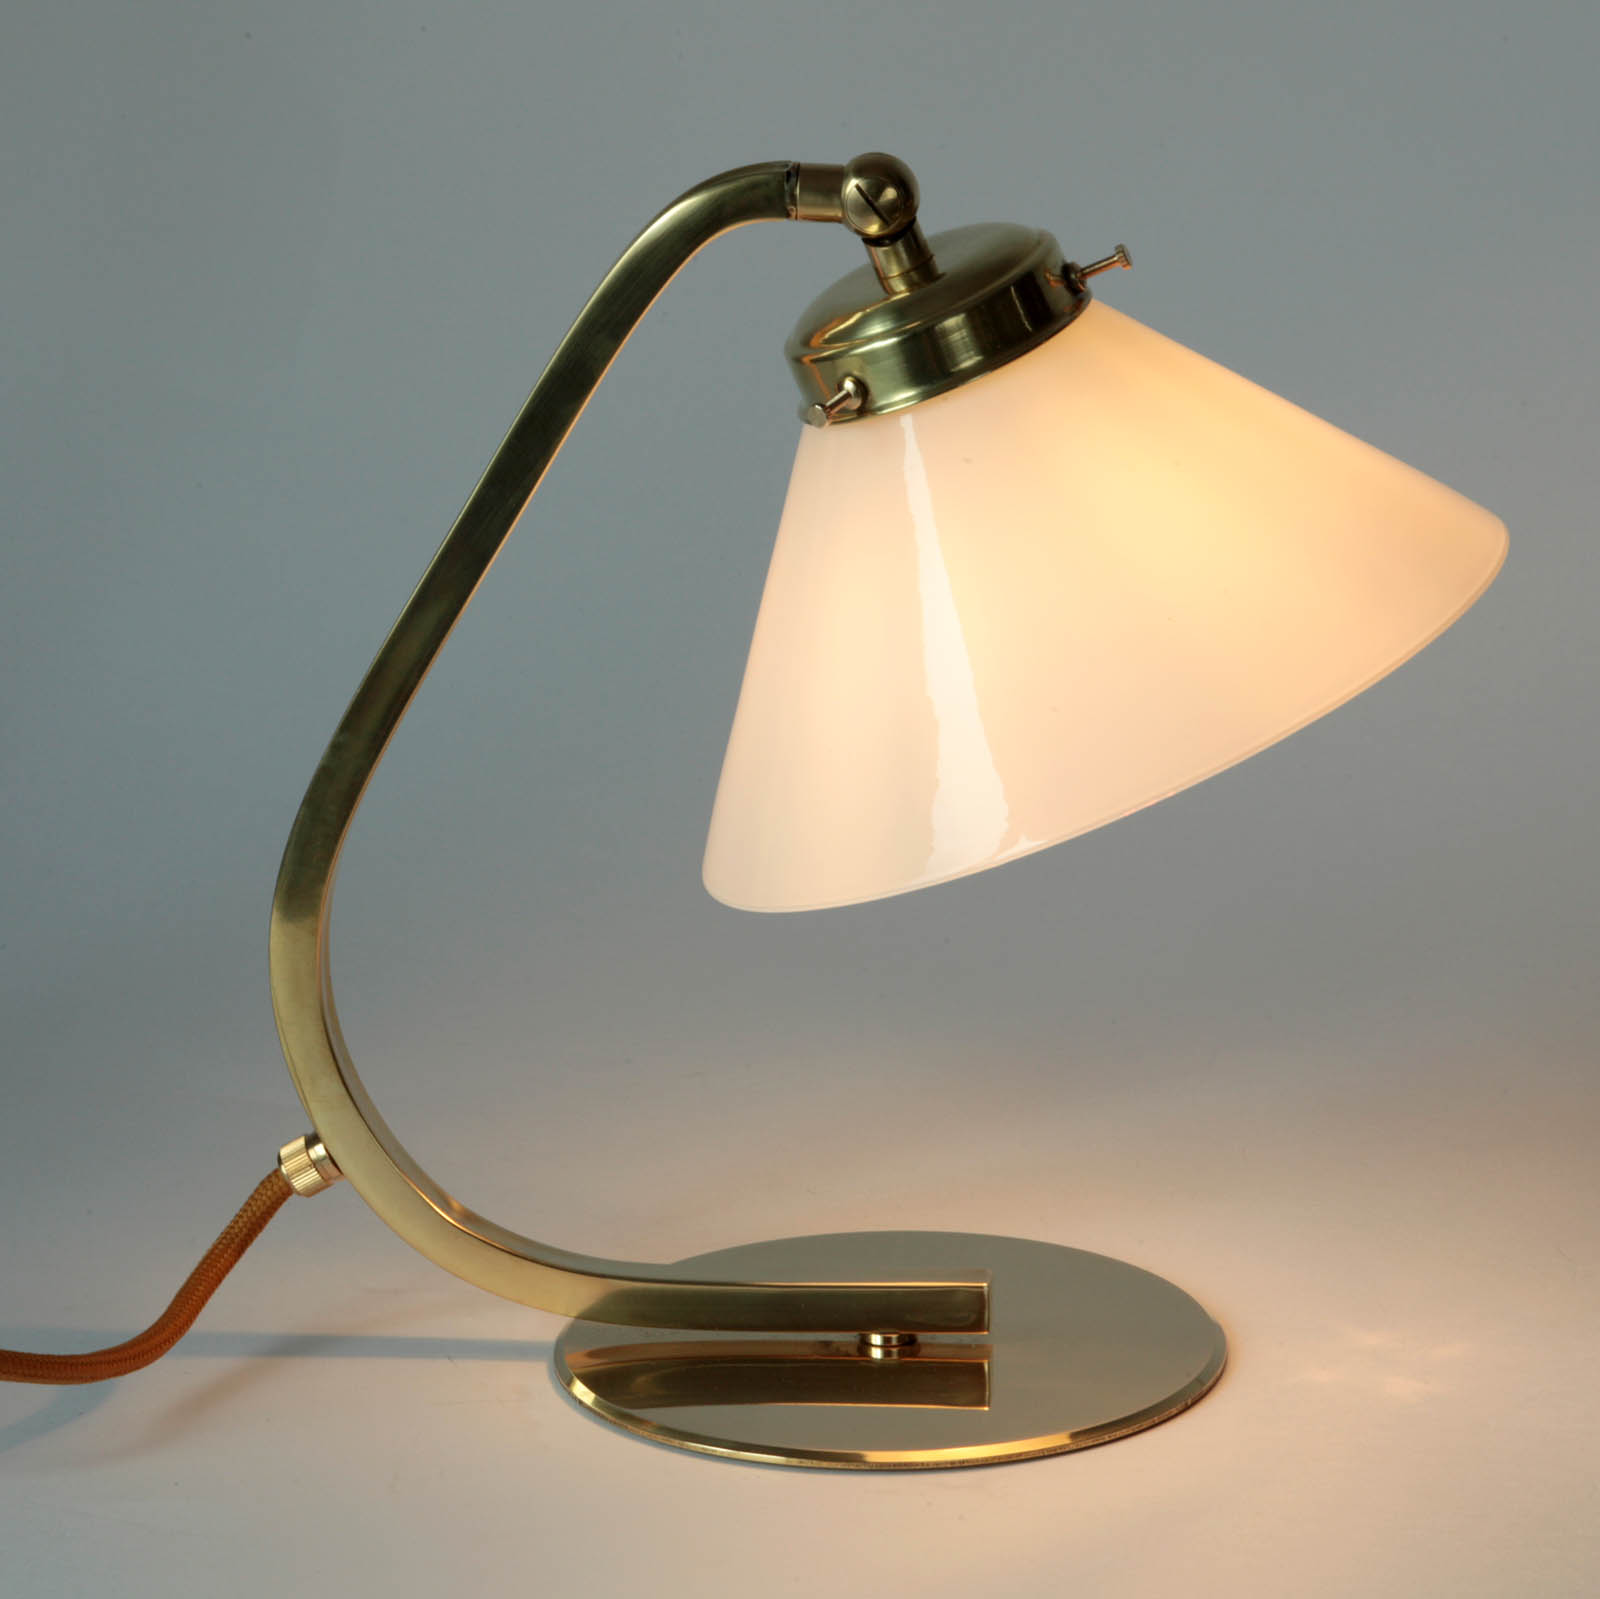 Small Table Lamp Made of Brass With Cone Shaped Shade: Messing poliert, unlackiert mit weiß glänzendem Glas